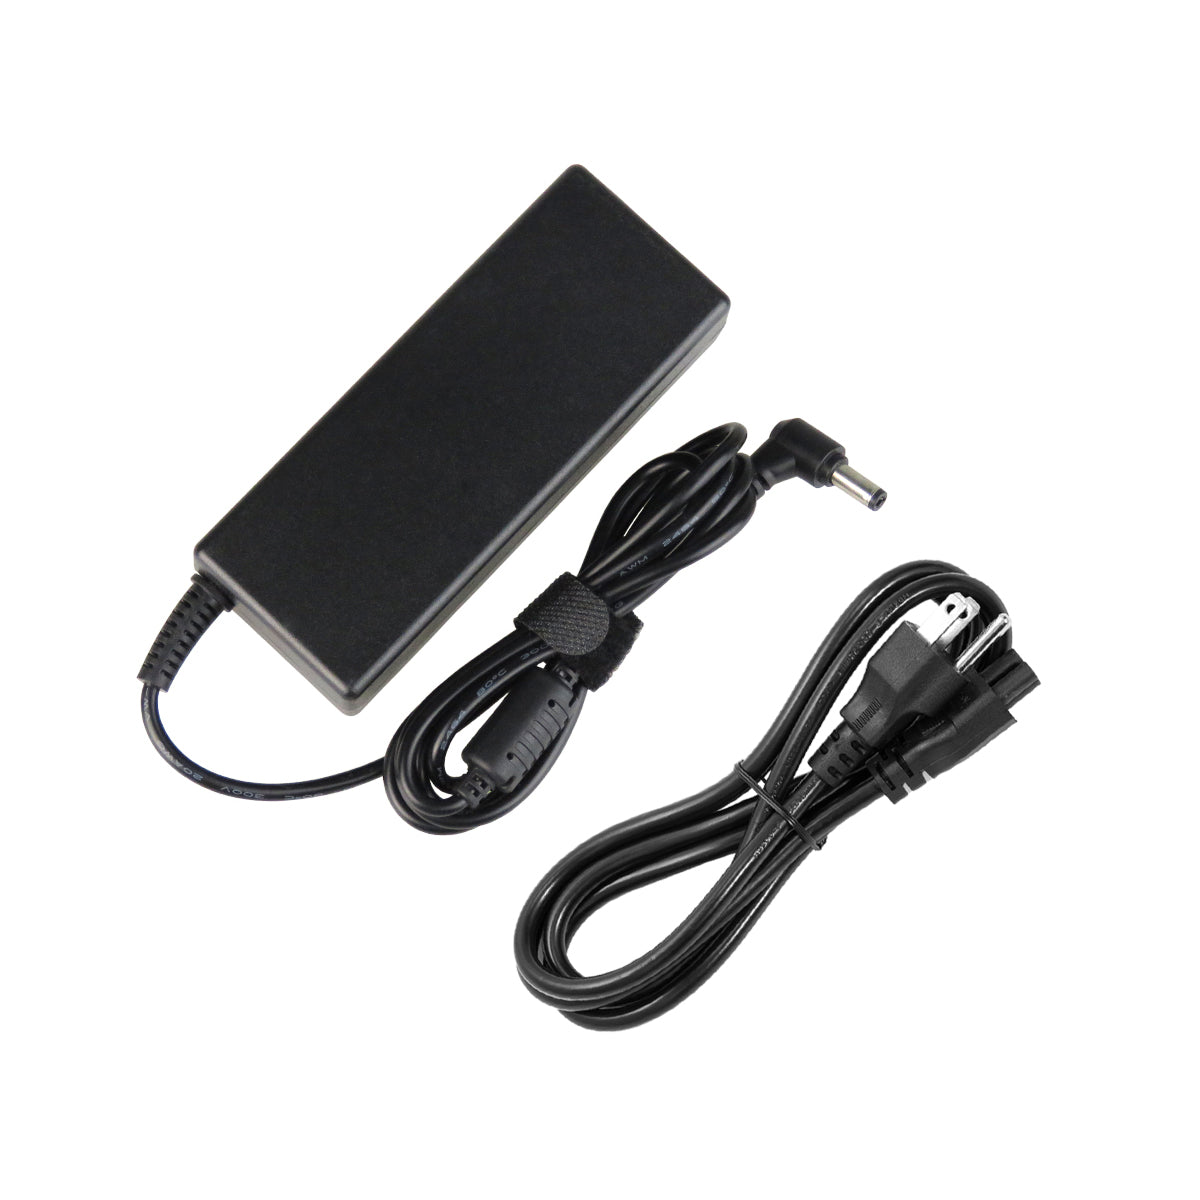 AC Adapter Charger for ASUS X54C-RB93 Notebook.